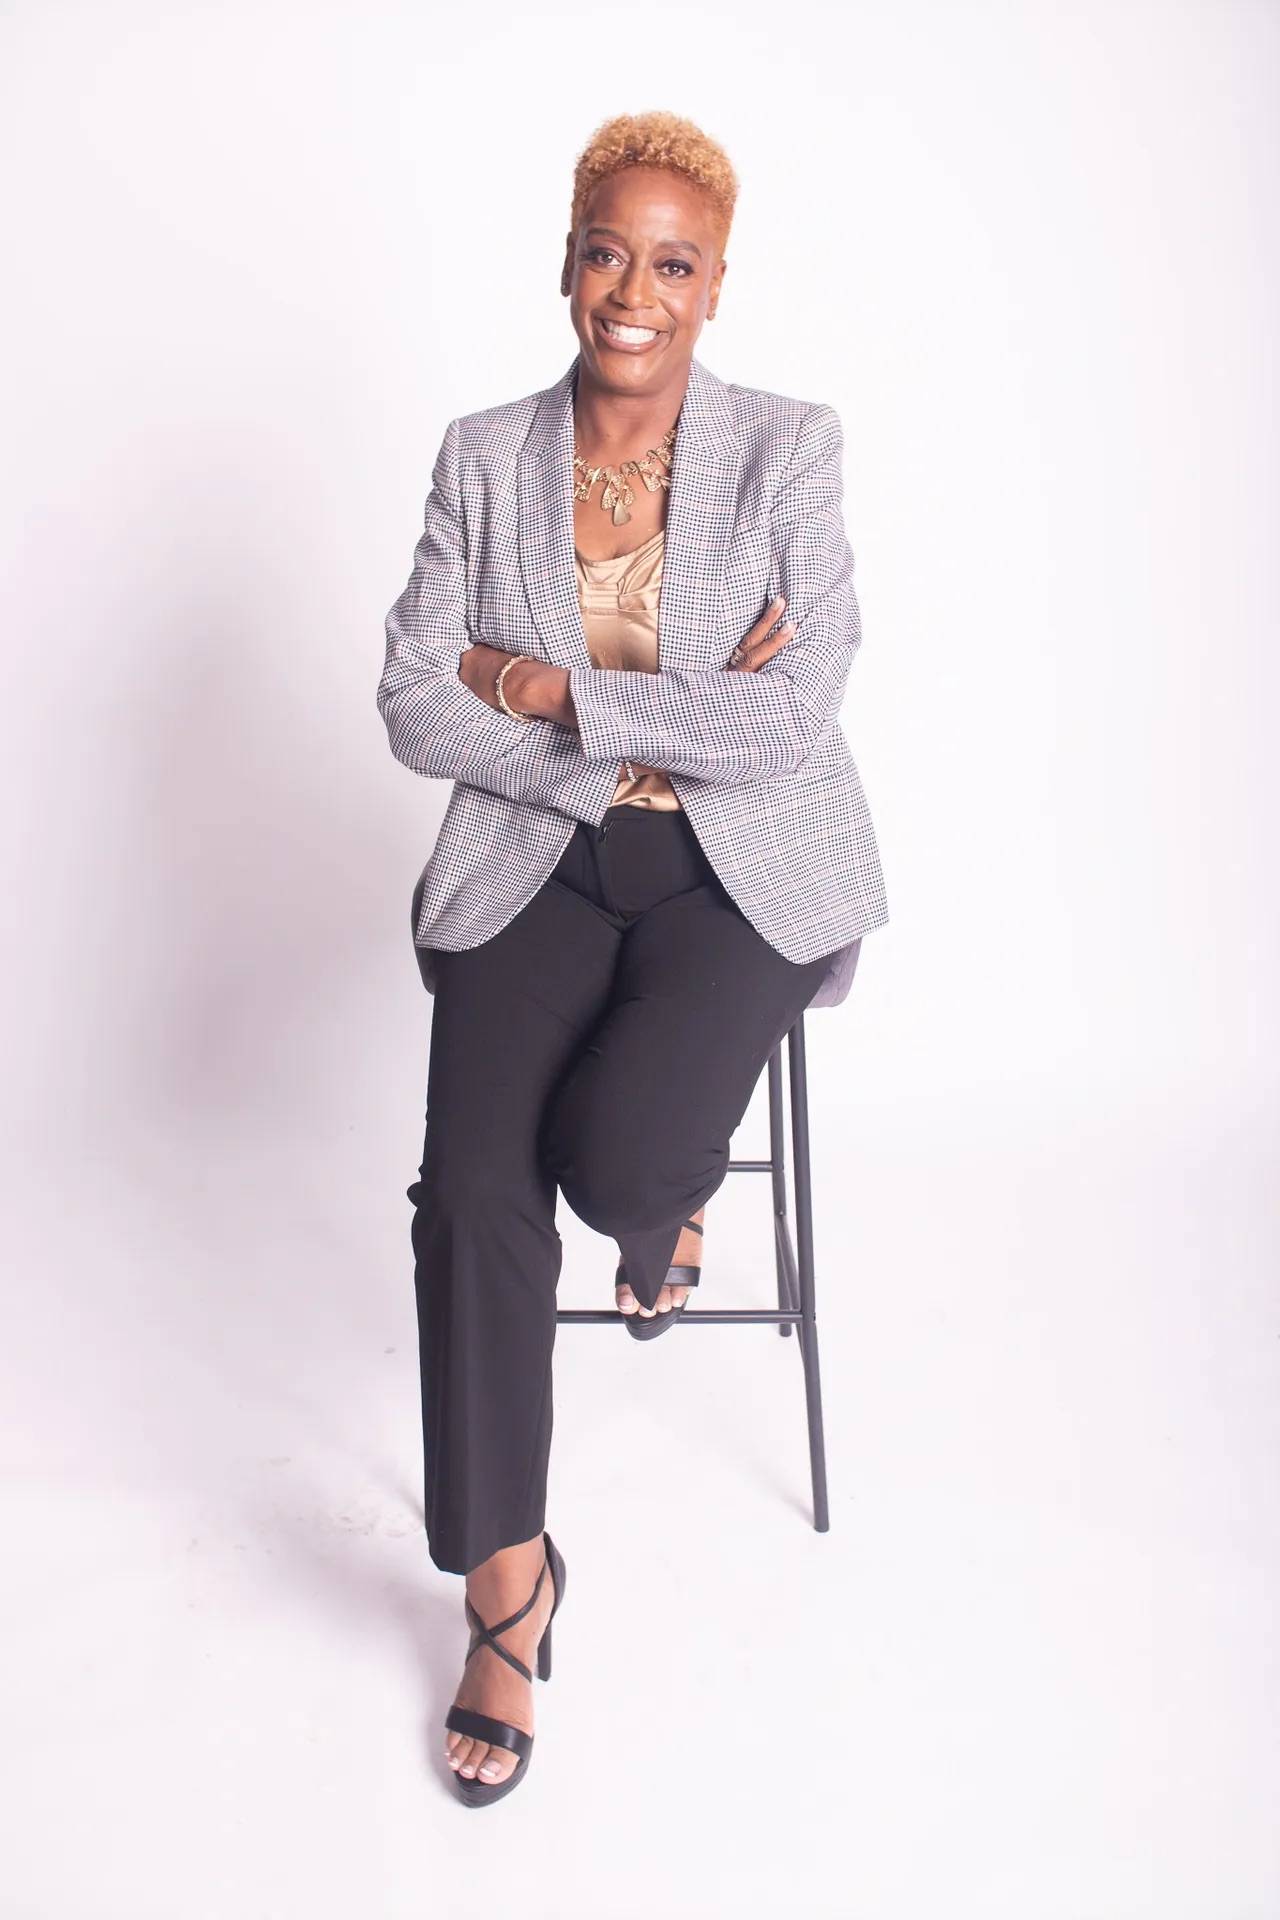 A photo of Robyn A. Christian wearing a great suit jacket and black pants, sitting on a stool in a studio with a white background.